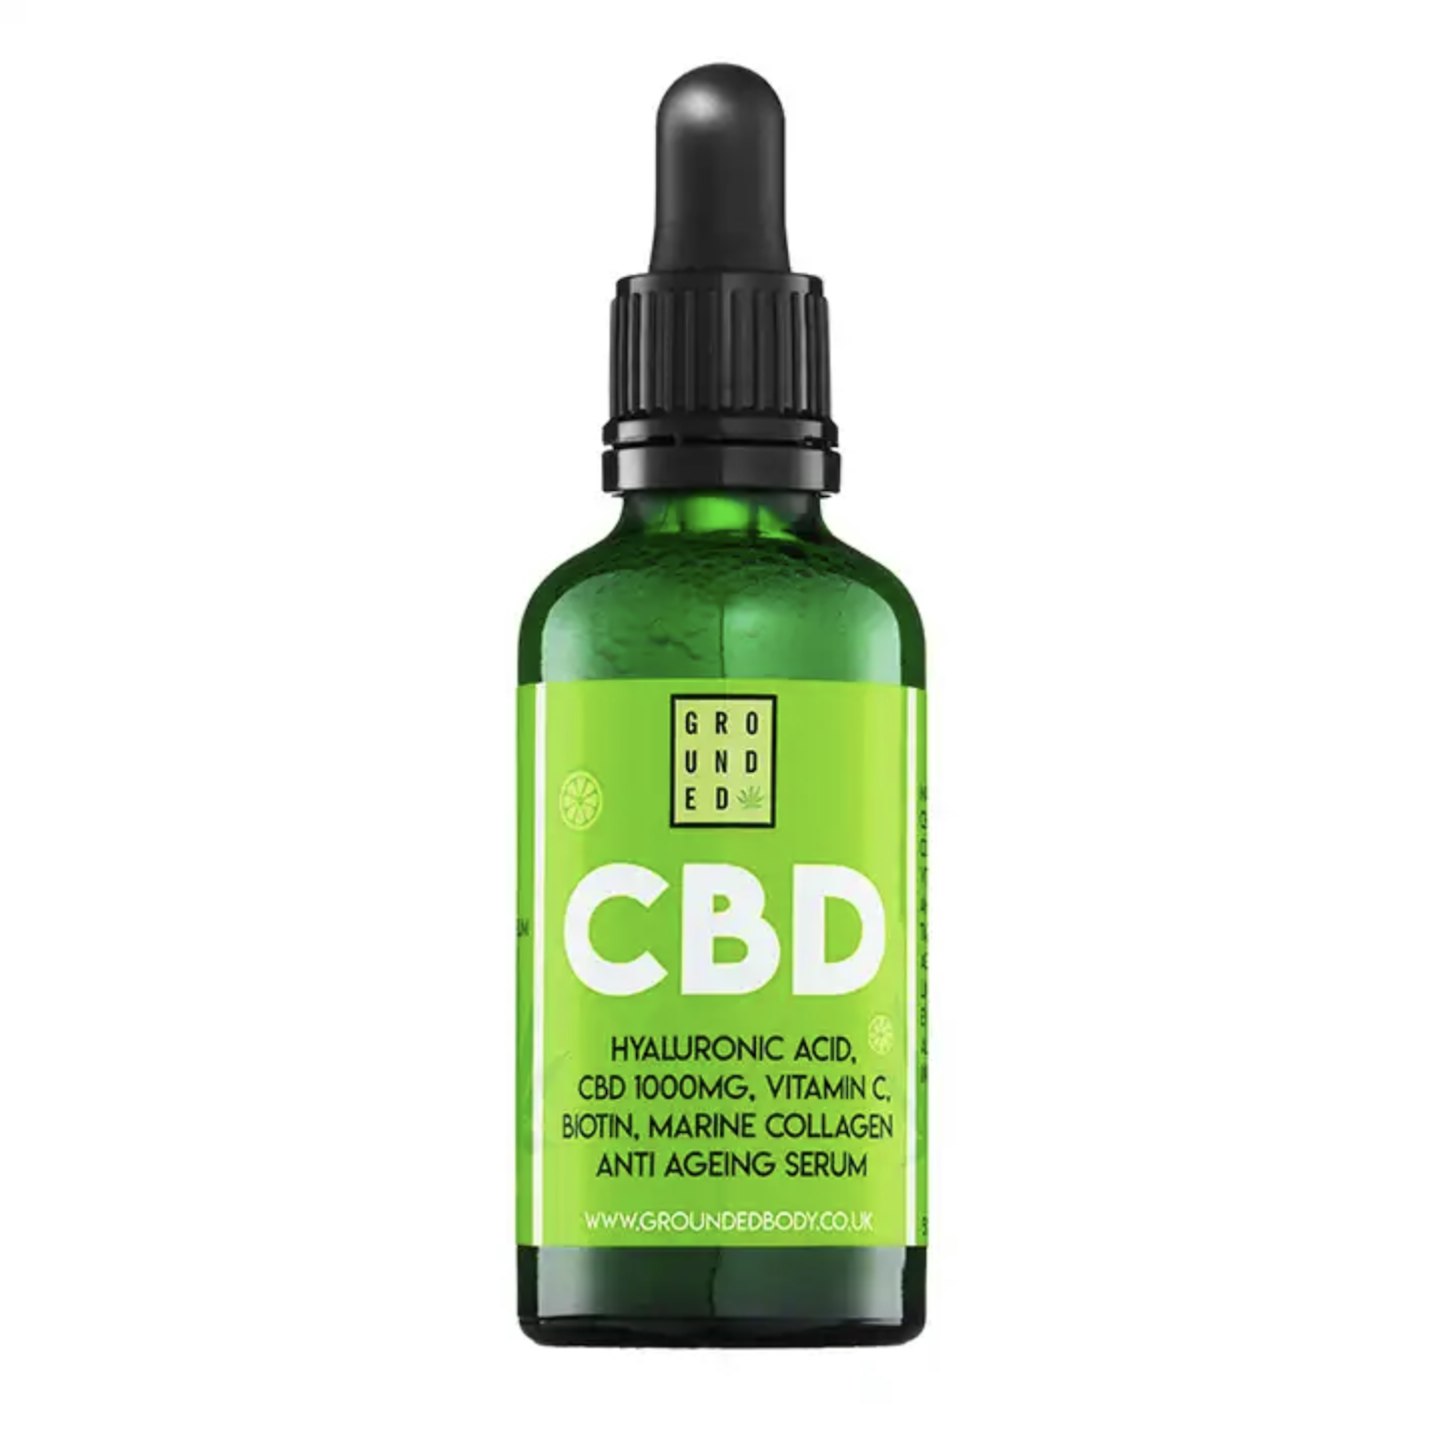 Grounded CBD and Hyaluronic Acid Facial Serum